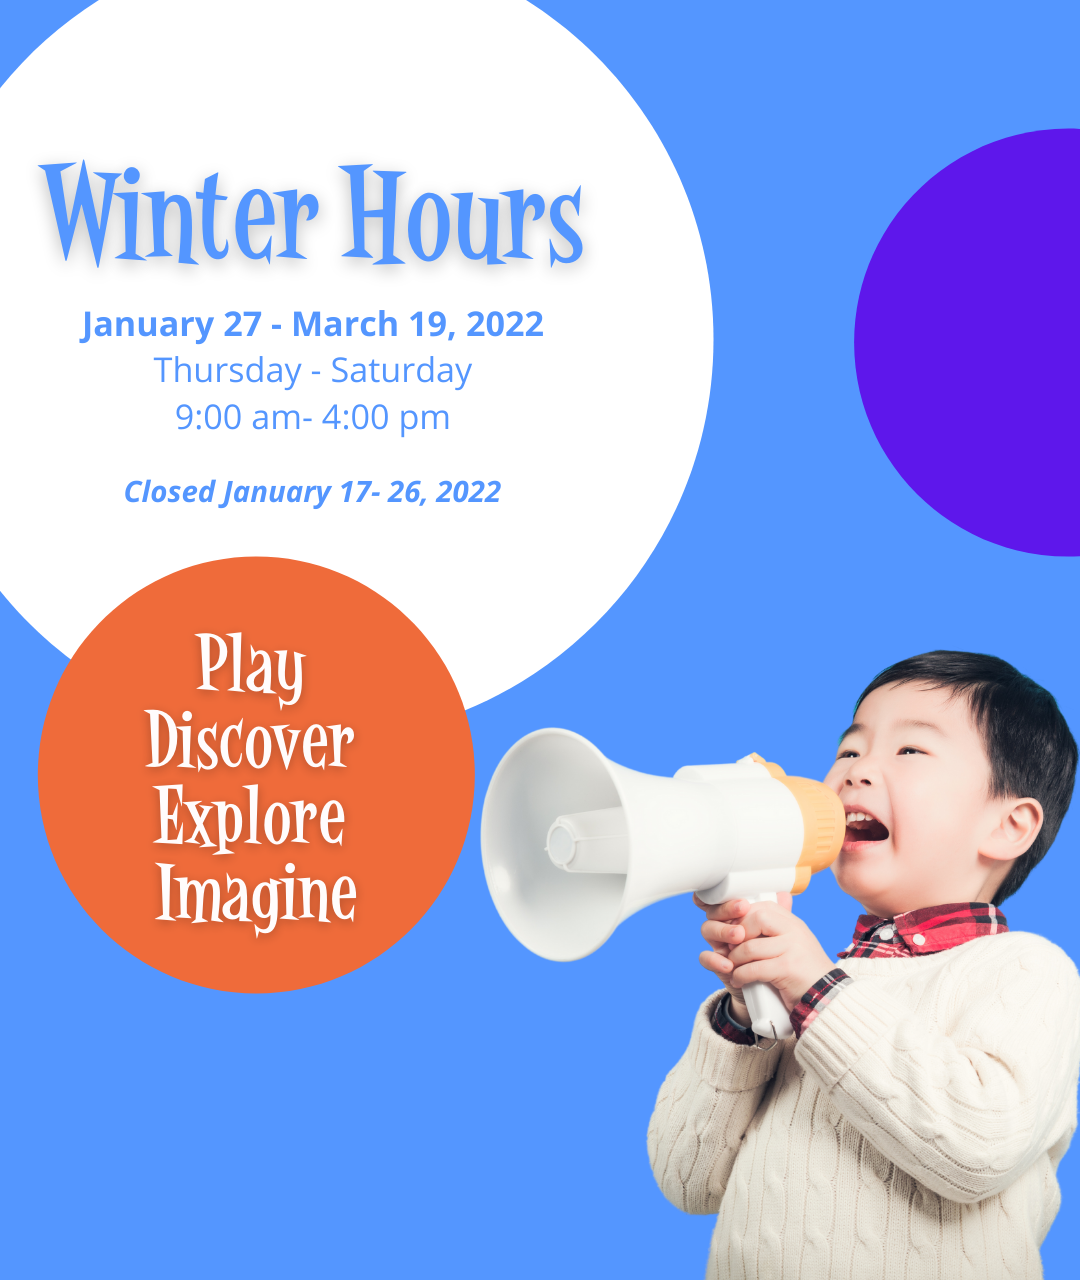 Winter Hours Announcement